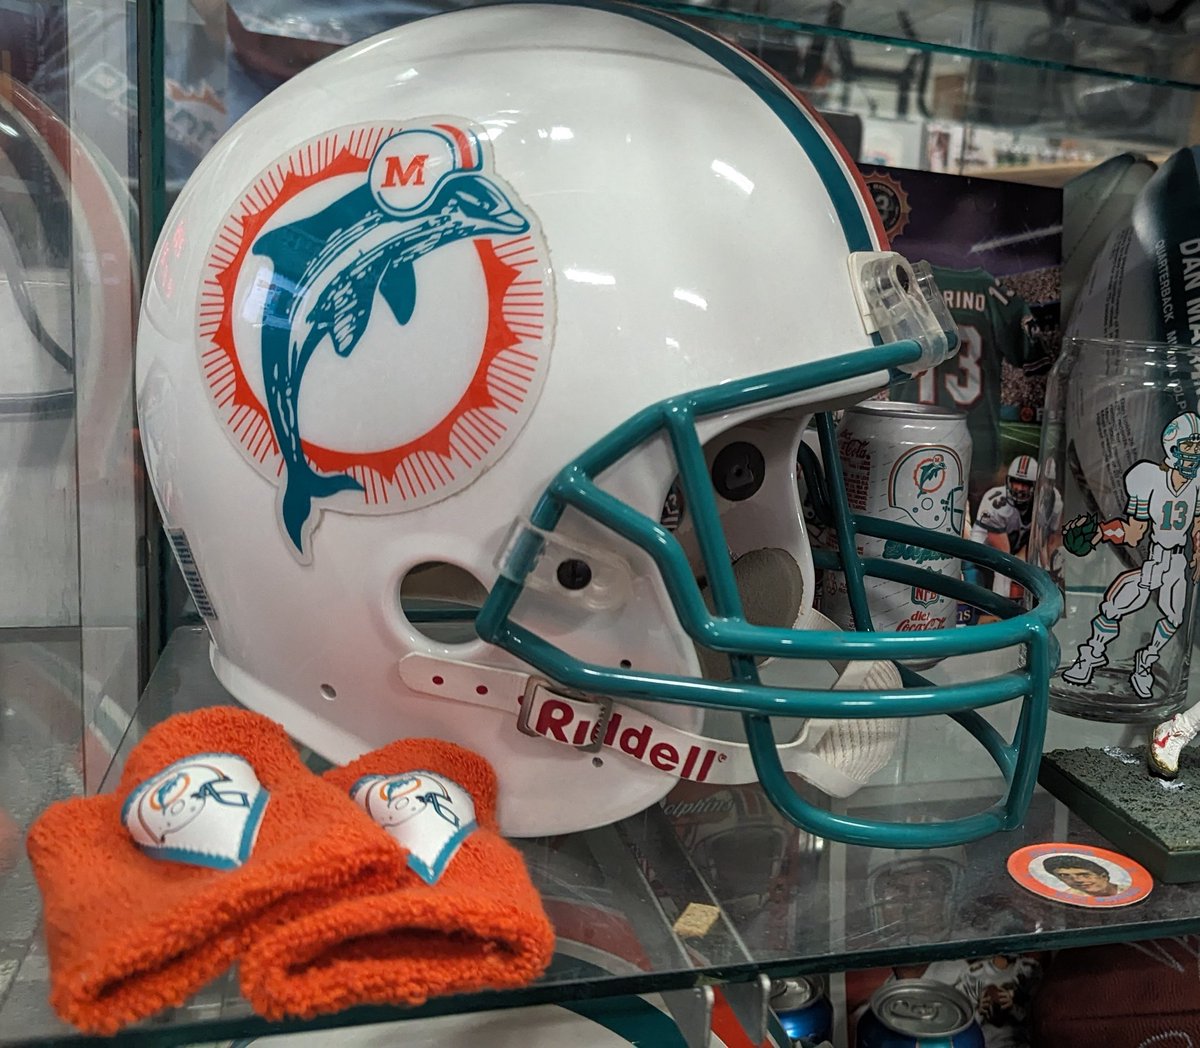 This IS the look the @MiamiDolphins should be returning to. This is a legacy franchise & they should look like one. Stop trying to distance this franchise from its history. Modernizing something doesn't make it better. Sometimes, things are perfect  the way they are...or were